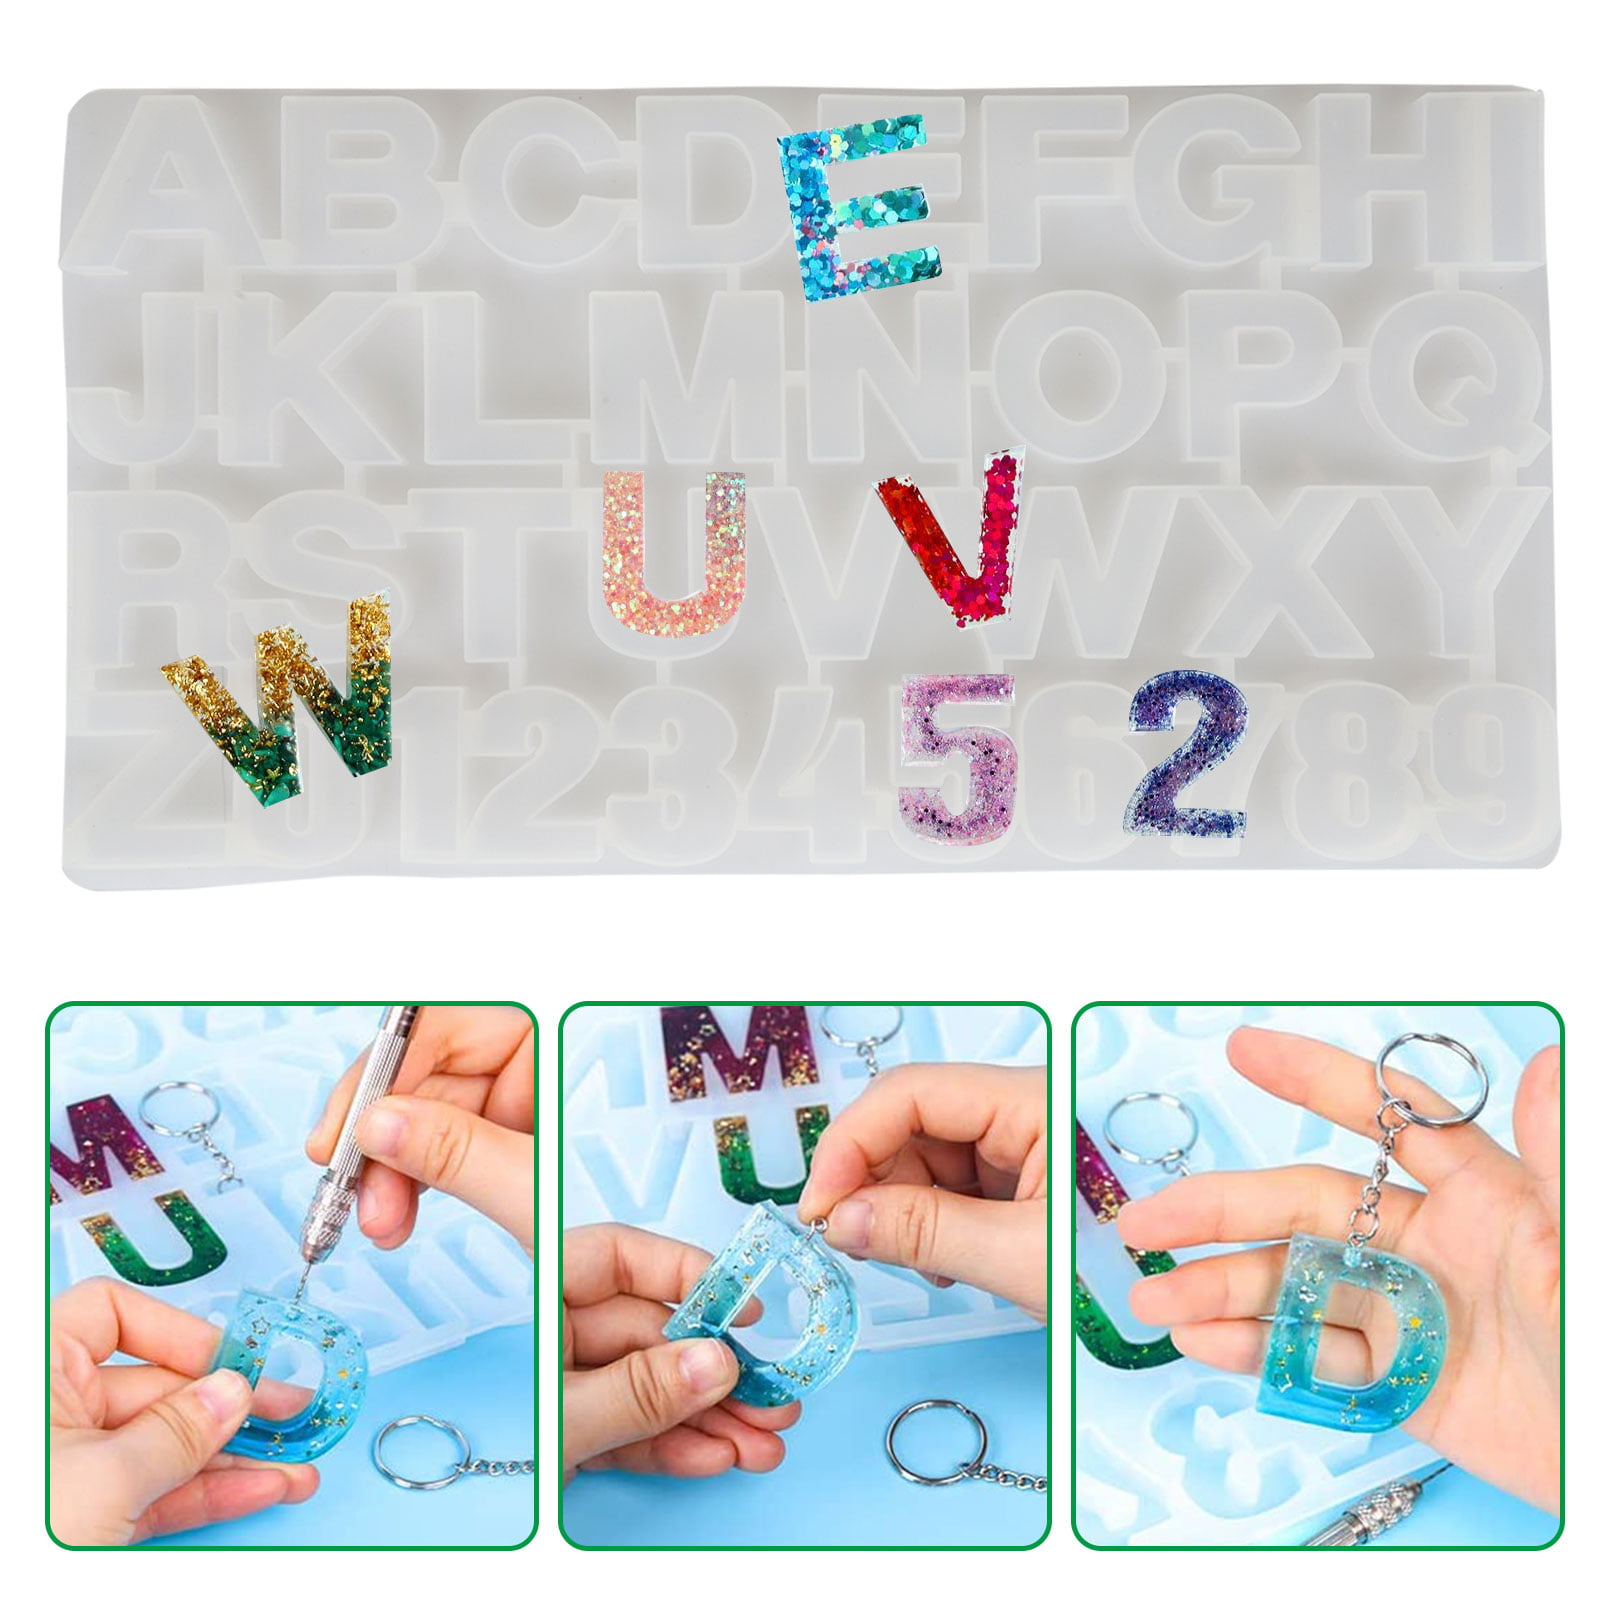 Alphabet Shaker Silicone Molds, Alphabets Mould, Letter Mold, Clear  Resin Mold, Silicone Flexible Mold, Resin Art Supplies